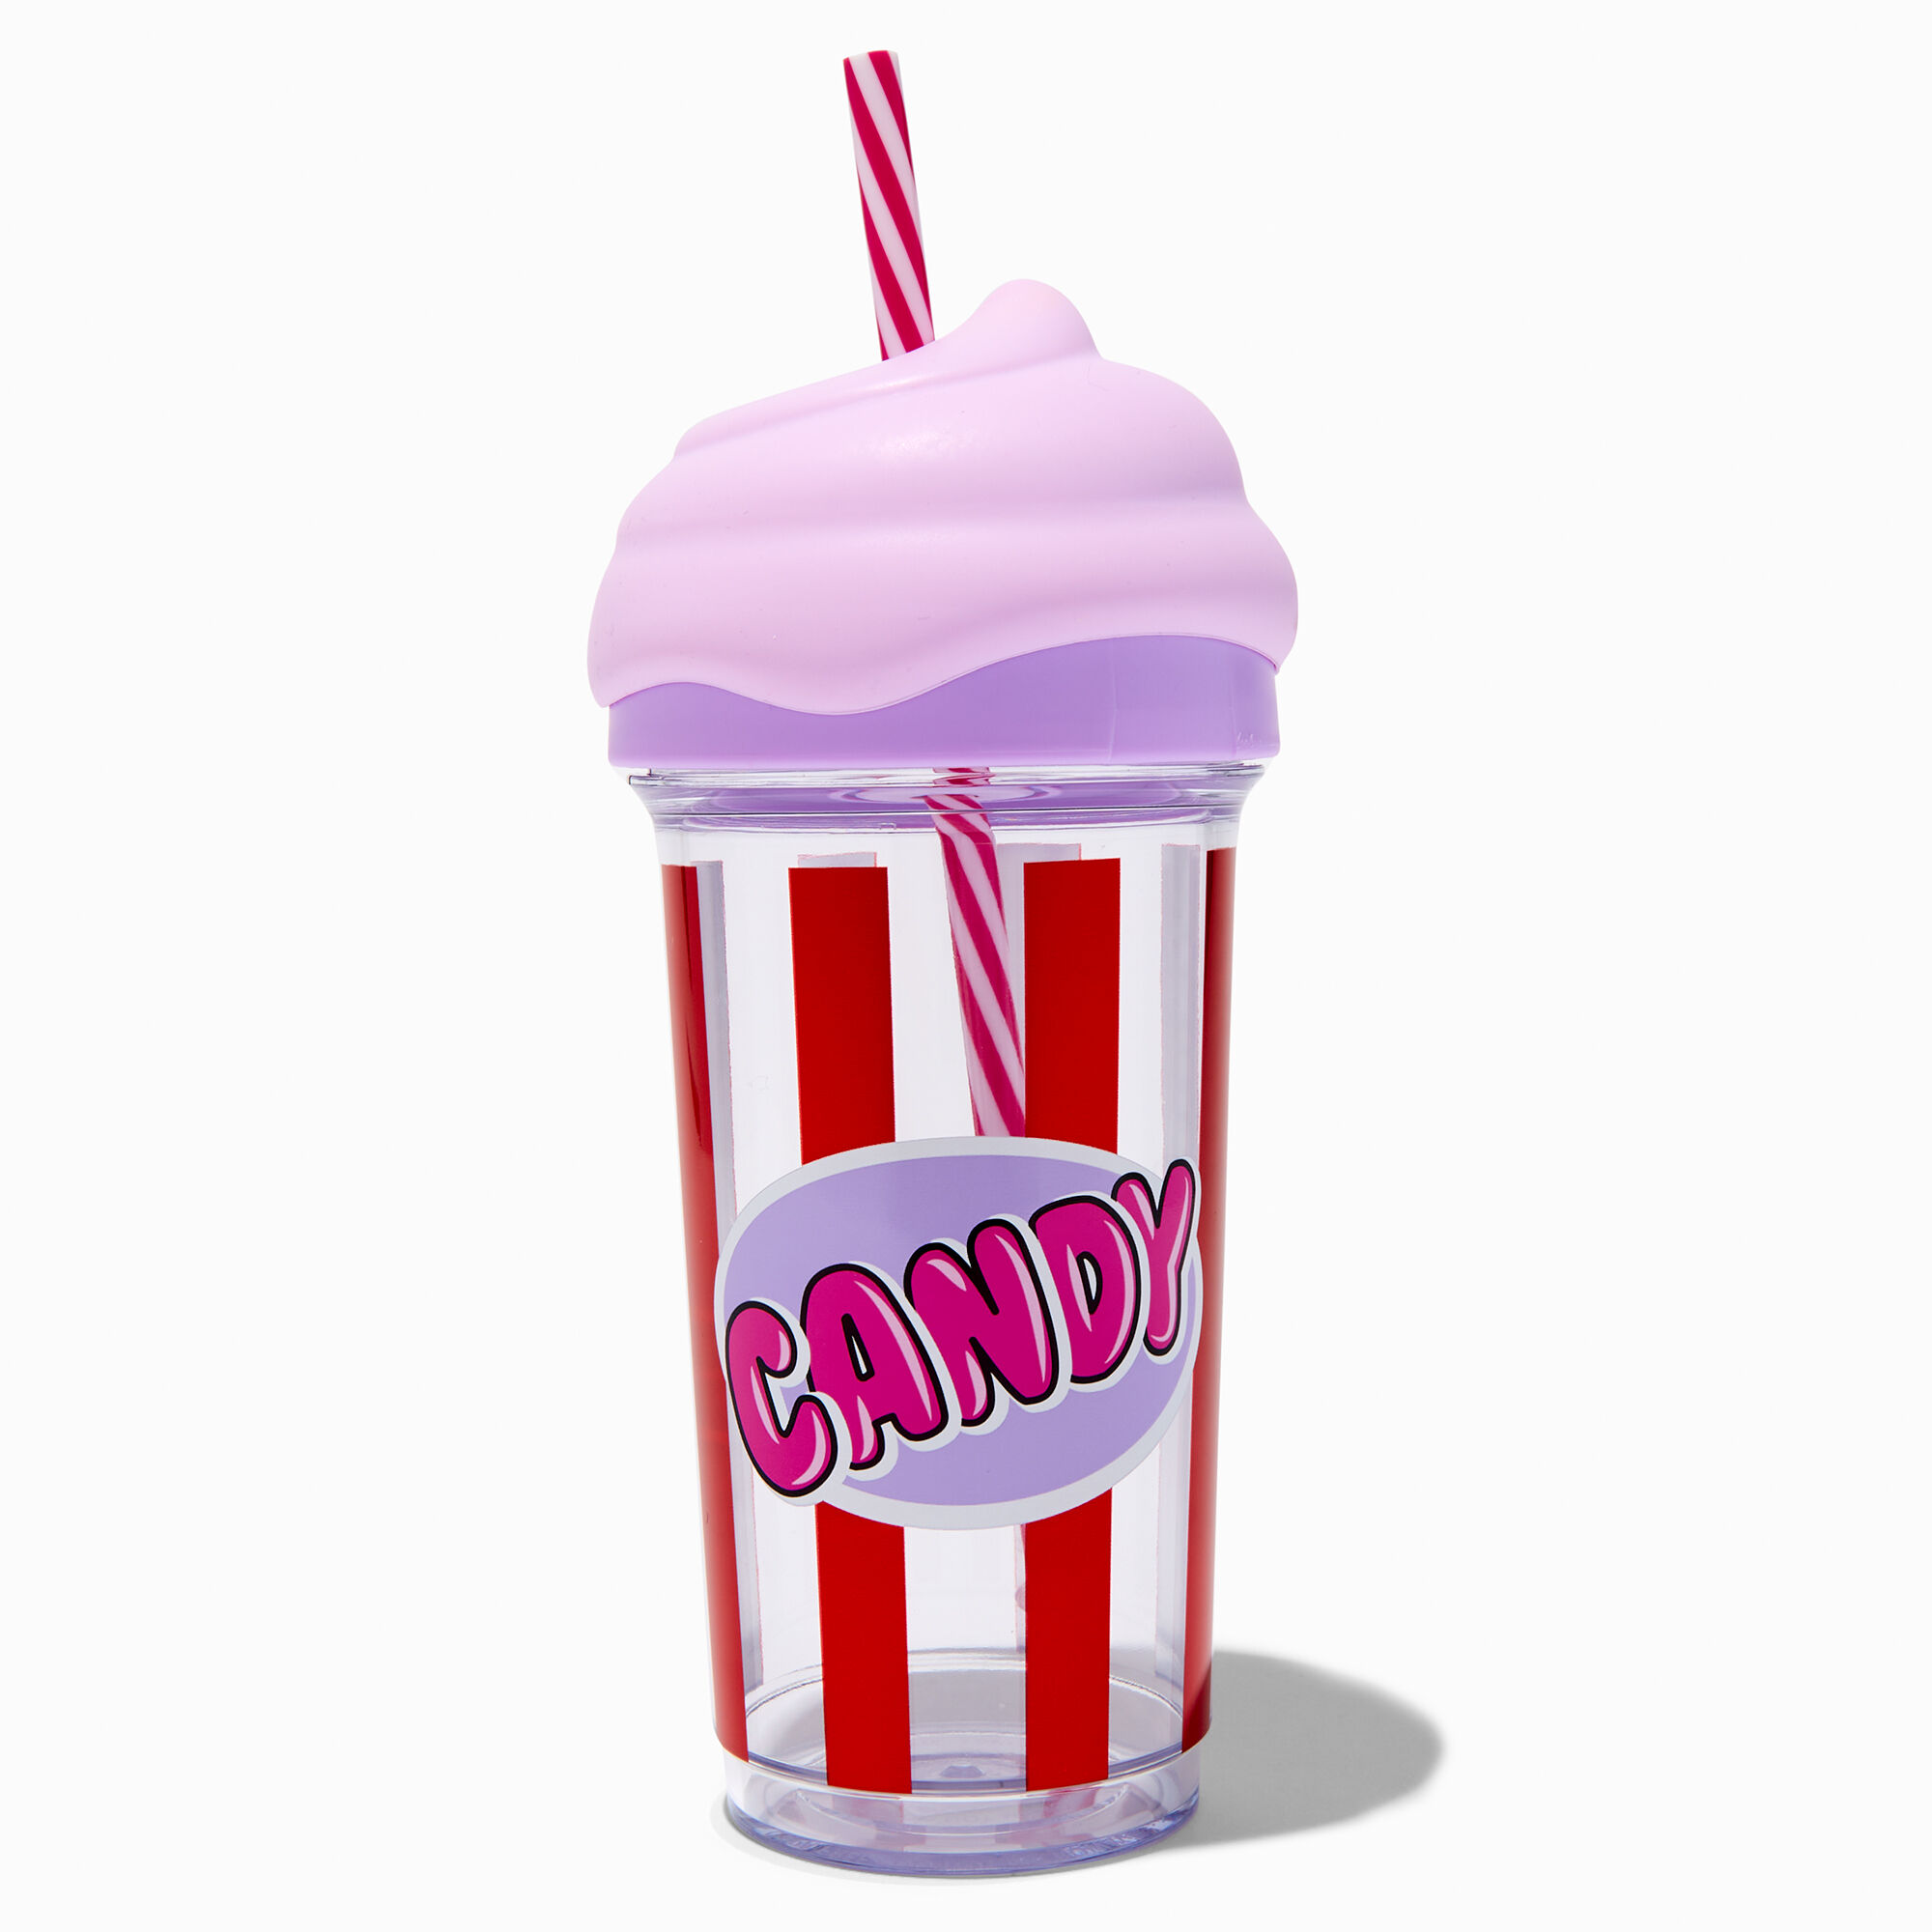 View Claires Candy Striped Tumbler information